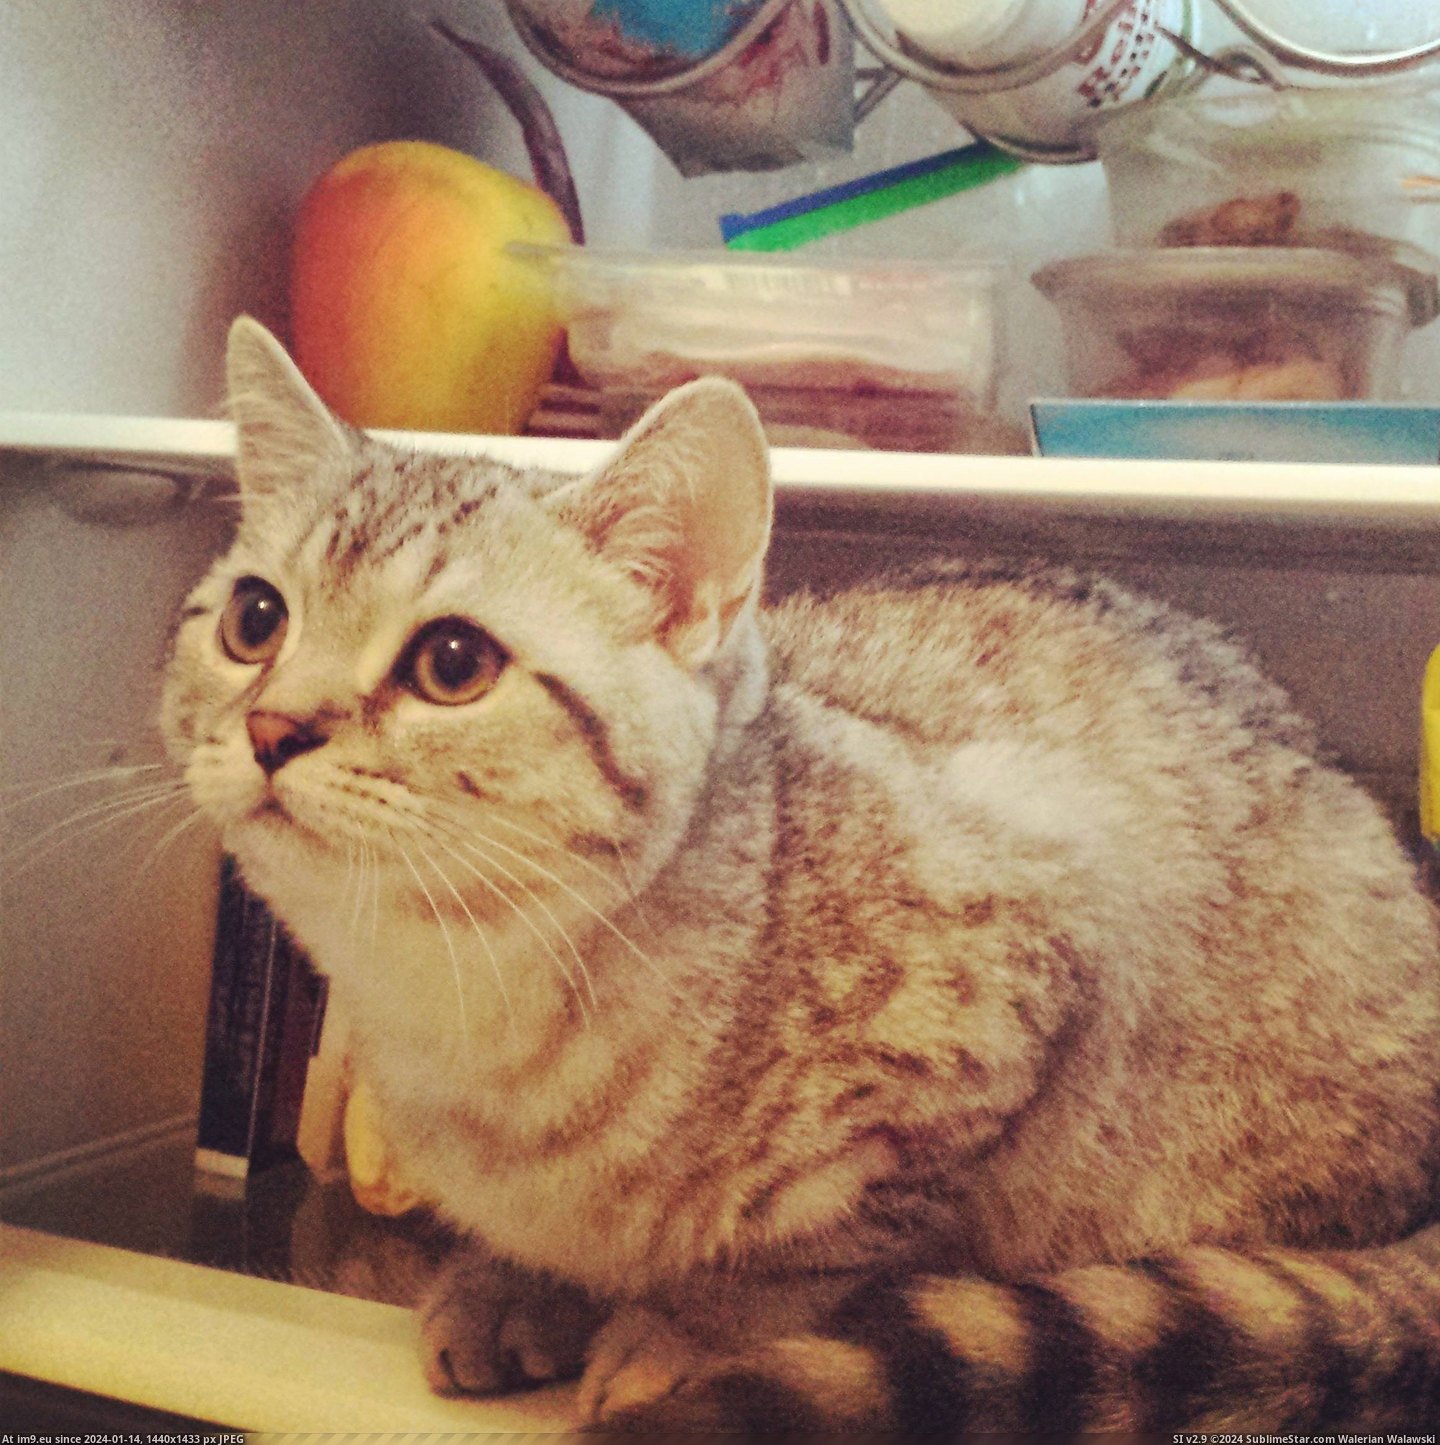 #Hot #Leave #Refuses #Jumped #Gary #Opened #Fridge [Aww] It's really hot at home, so when I opened the fridge Gary jumped in and now refuses to leave -.-' Pic. (Image of album My r/AWW favs))